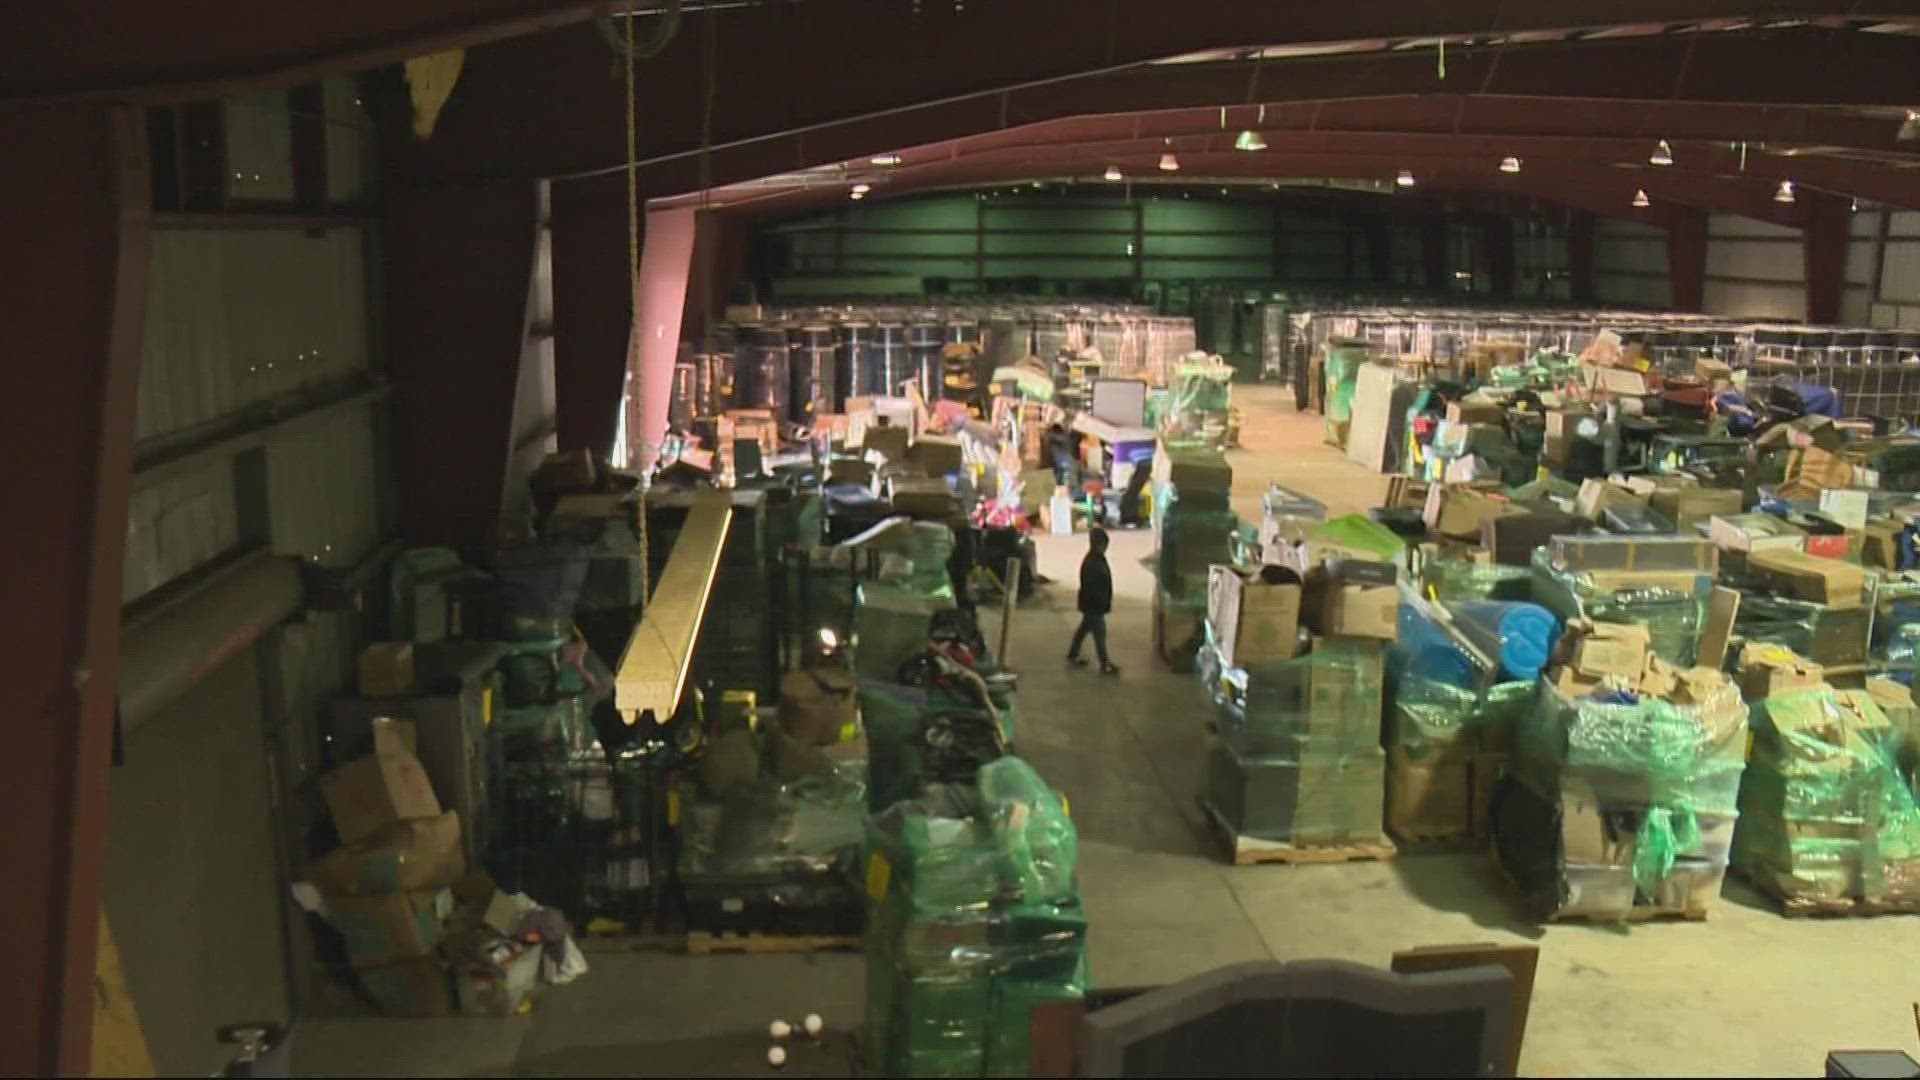 Items belonging to people who hired East Freight Logistics were found in a warehouse in Salem. Now the victims are going there to claim their possessions.